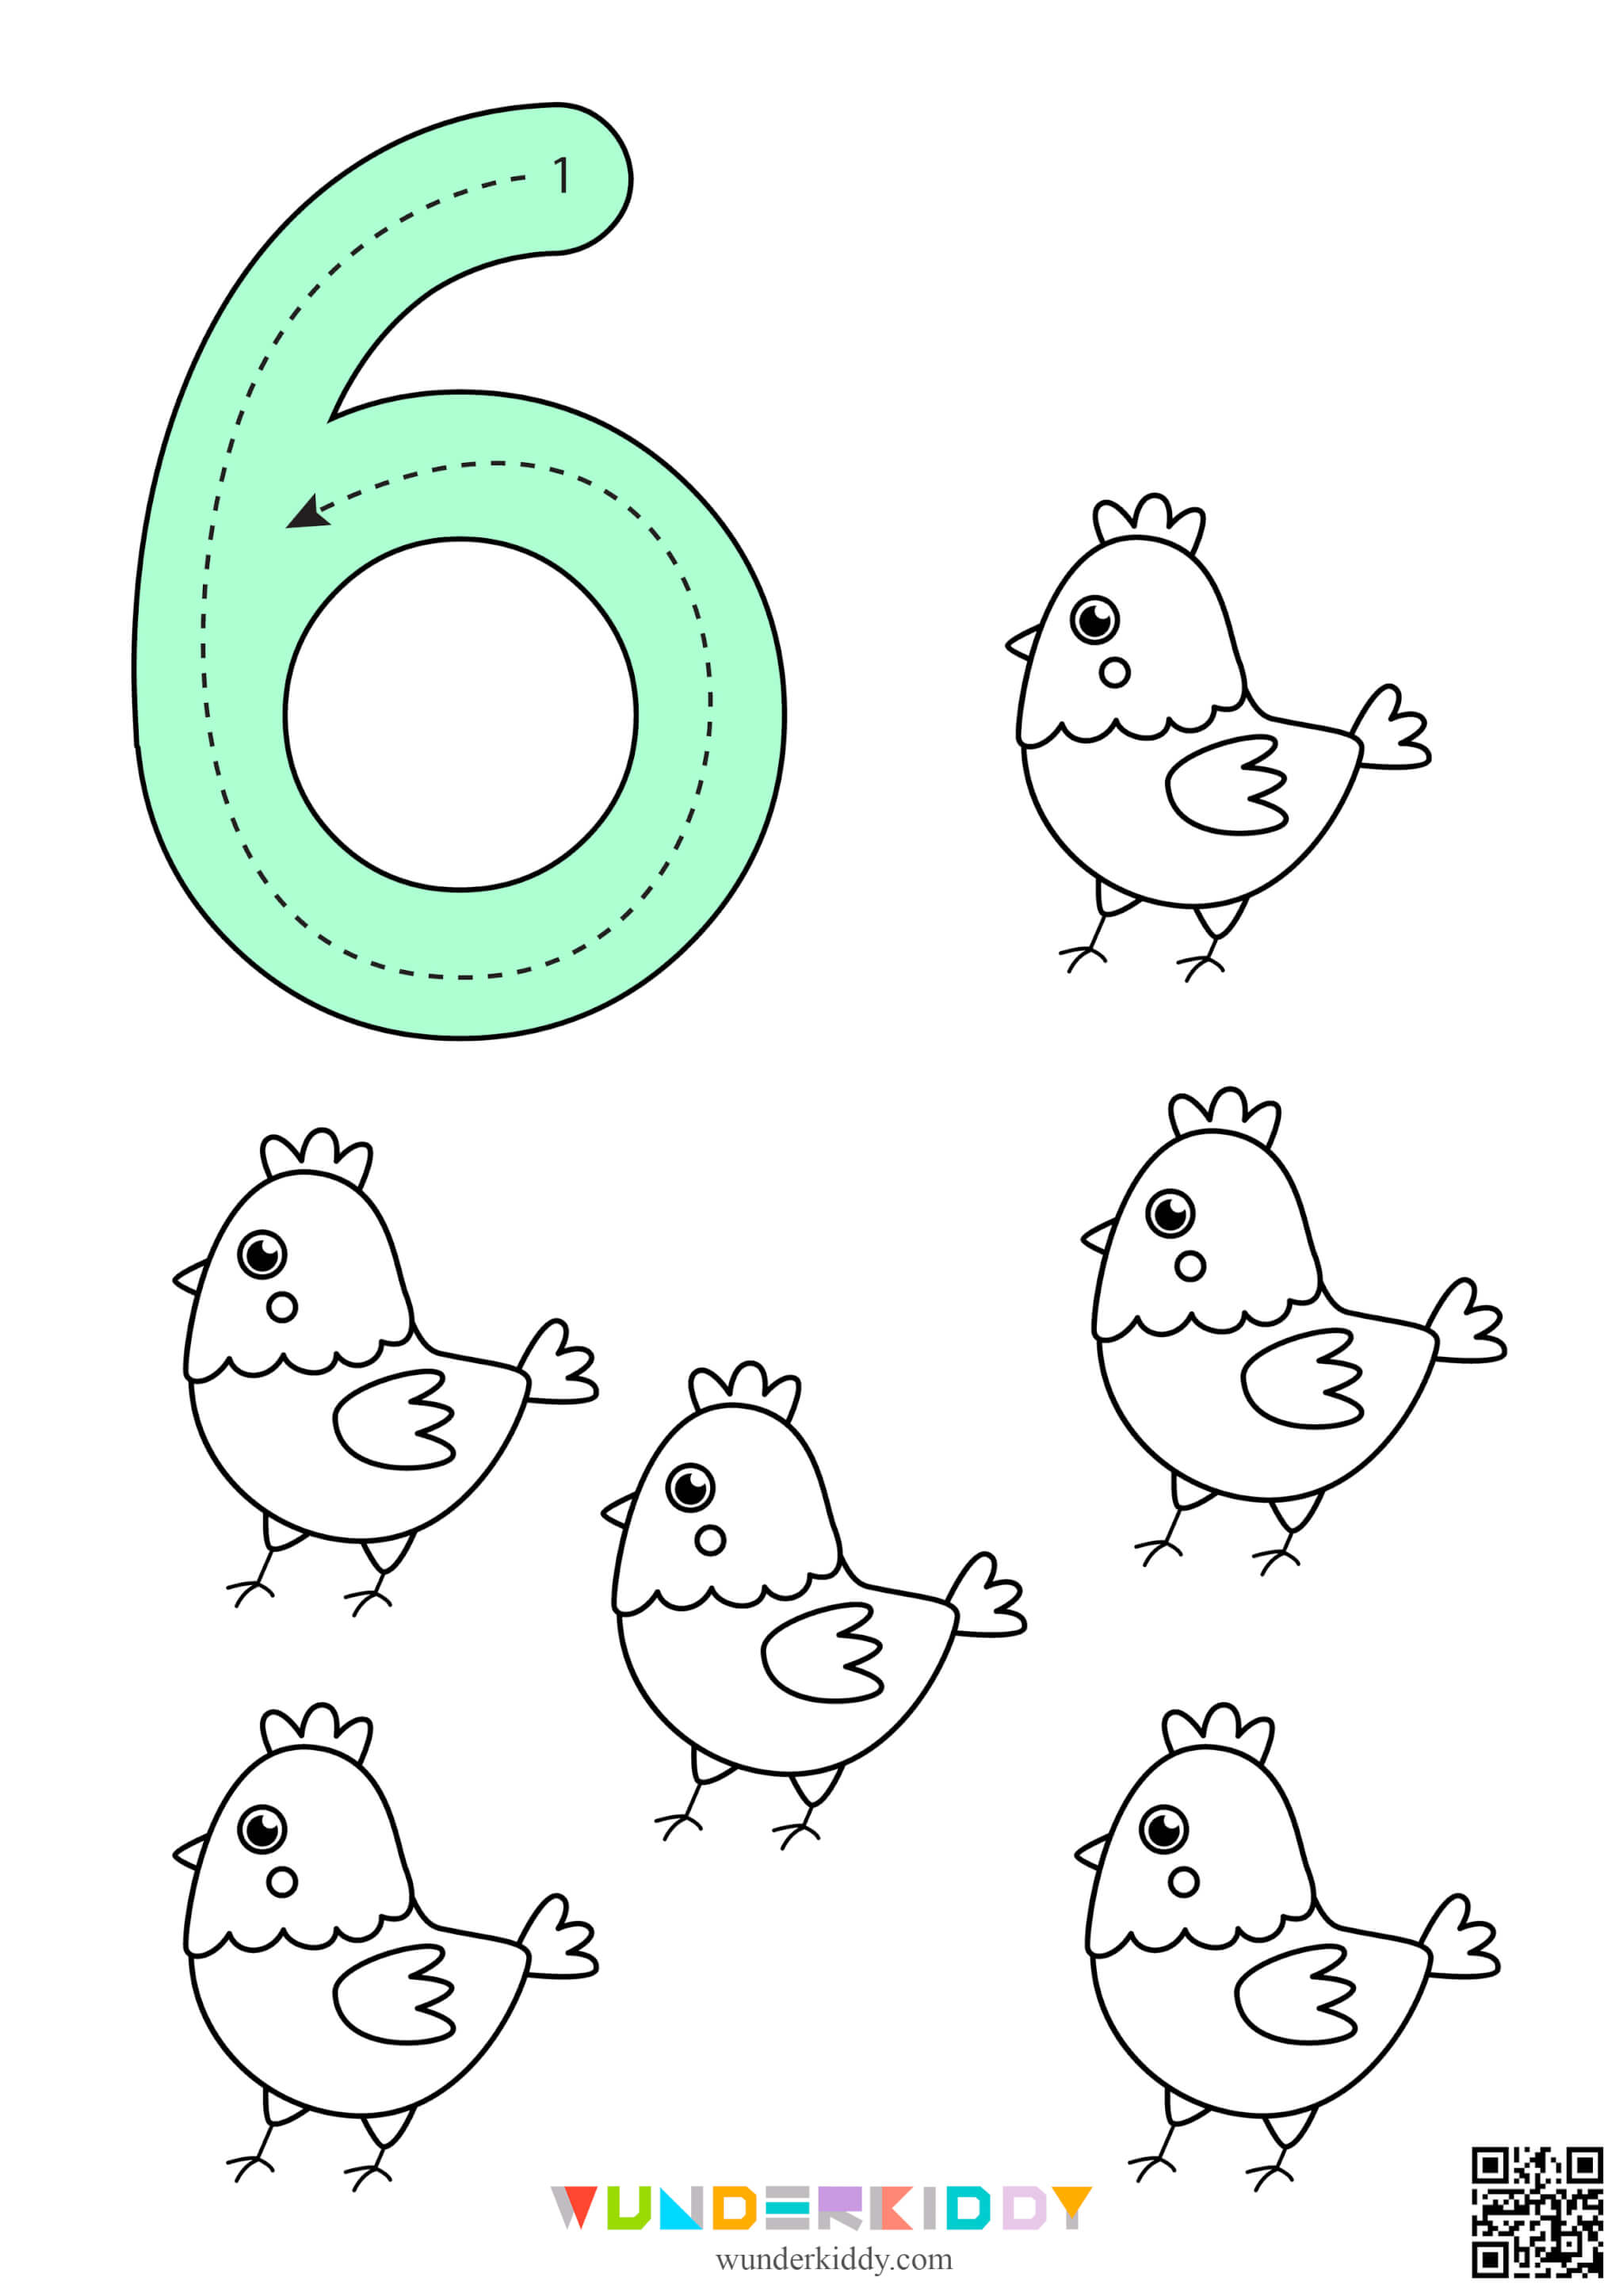 Worksheets «Count and color» - Image 7